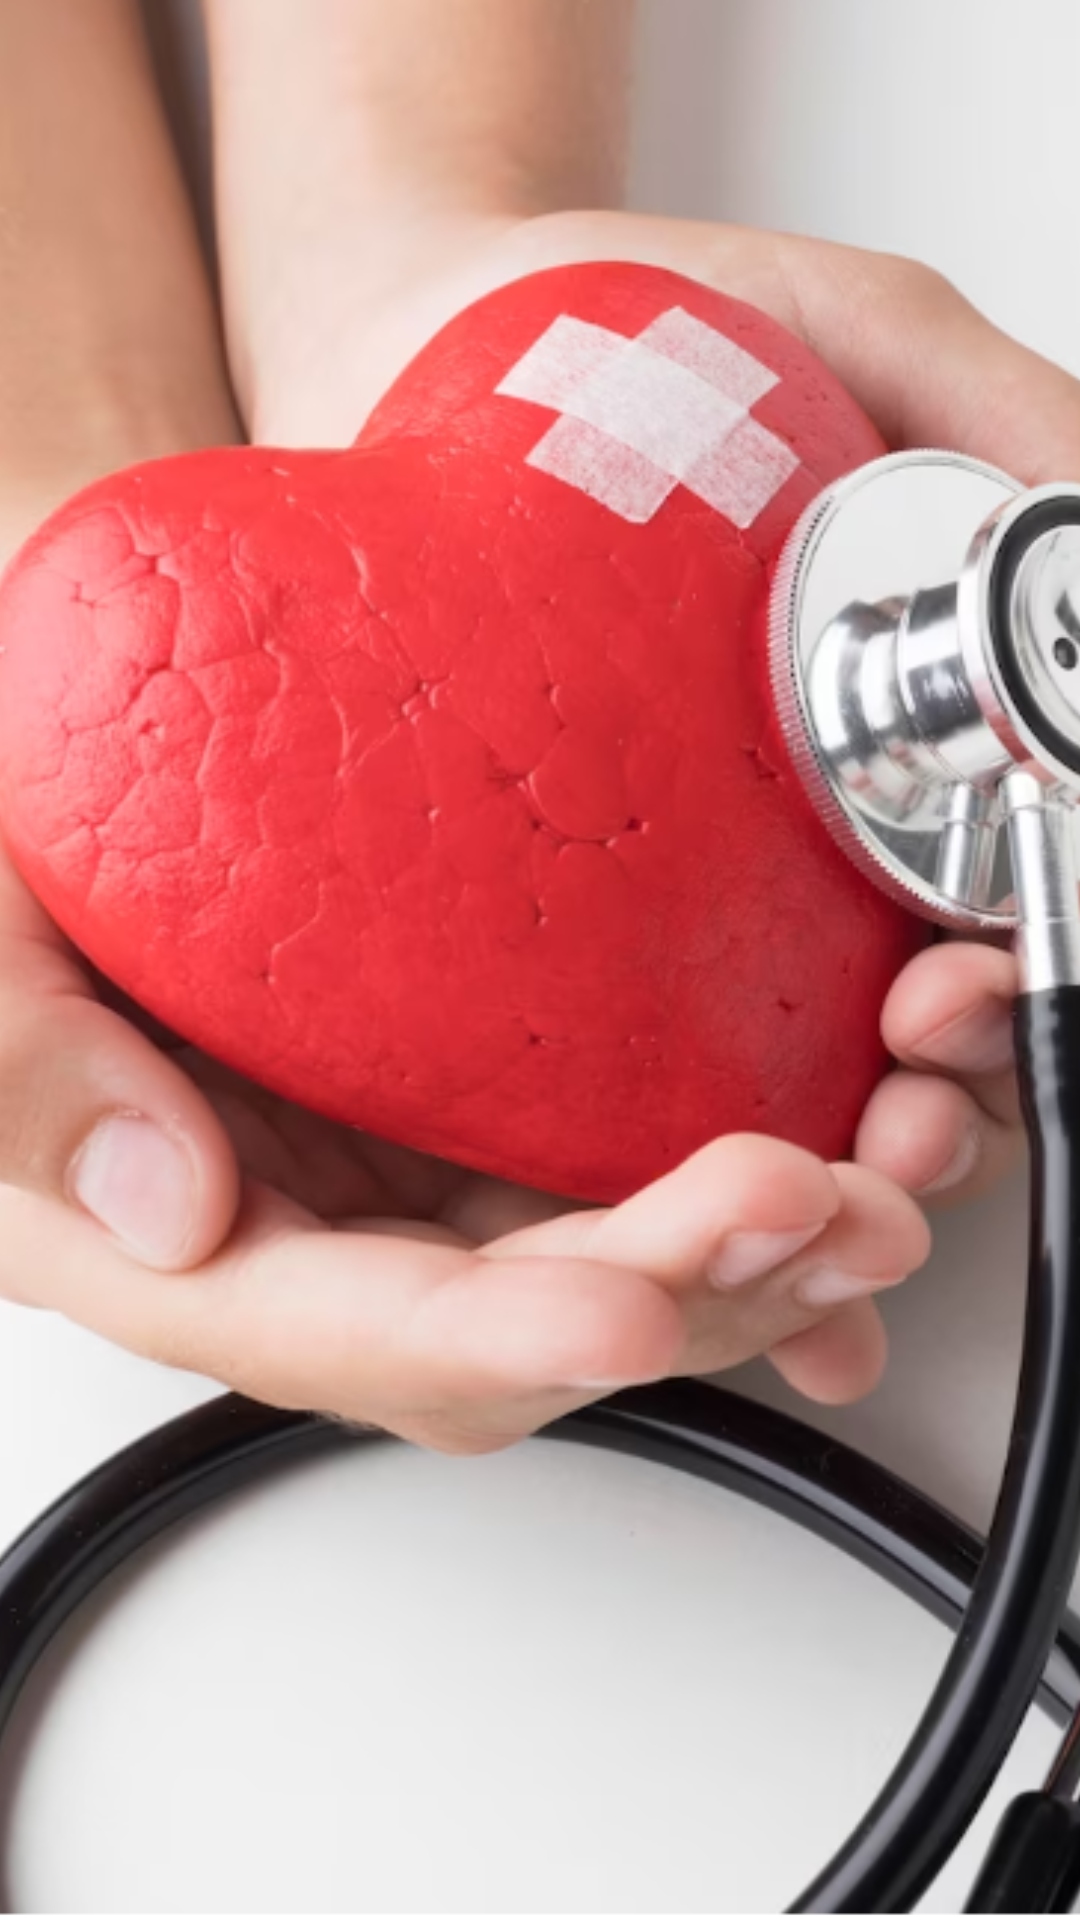 What are 3 differences between heart attacks and cardiac arrest?